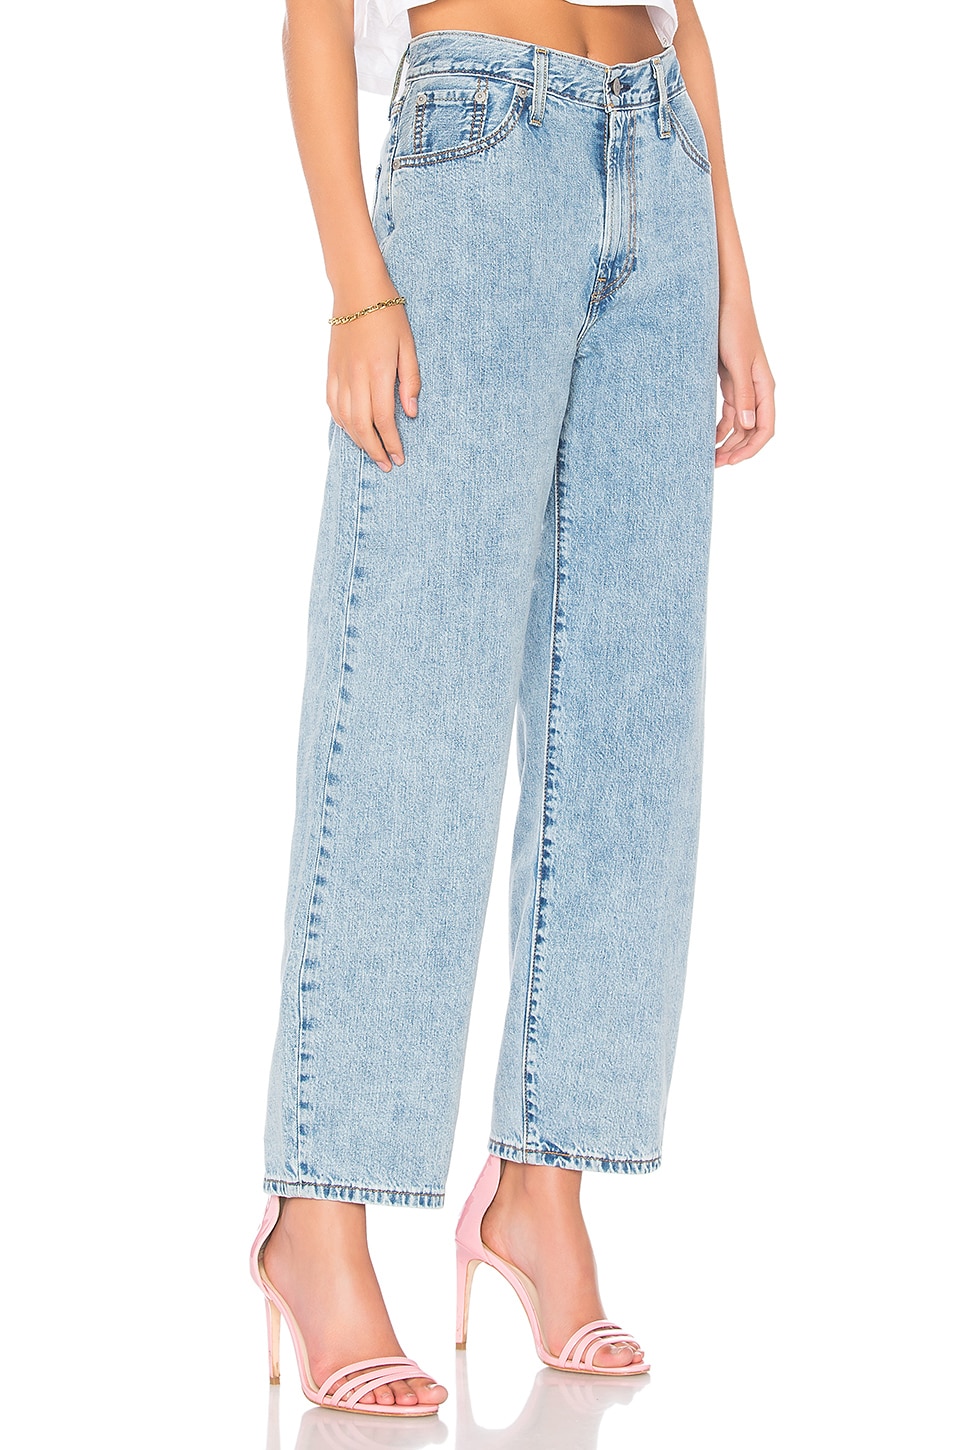 LEVI'S Big Baggy Jean in Real World | REVOLVE